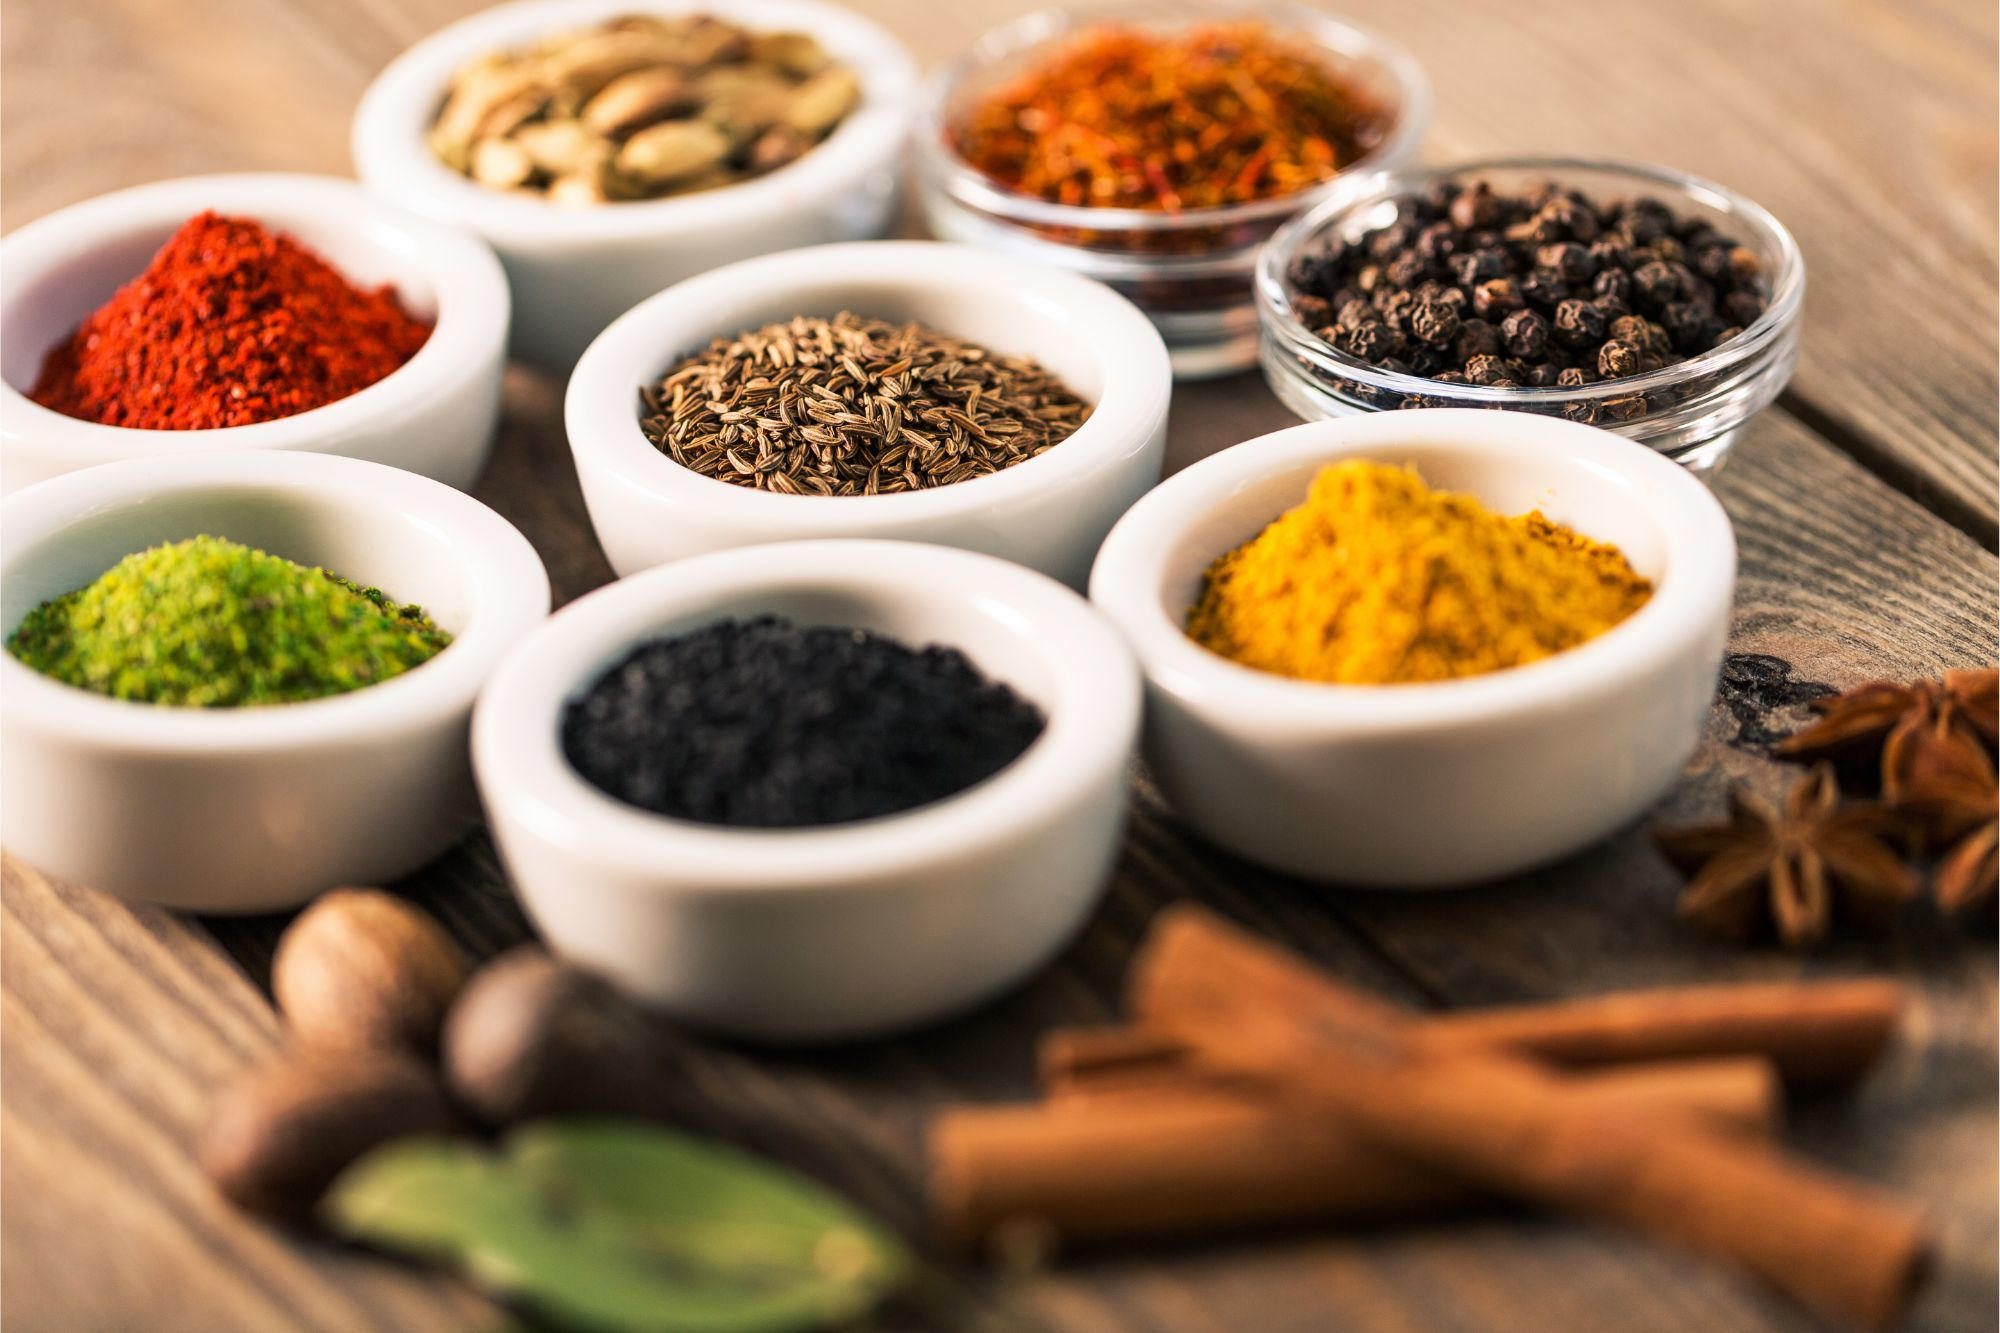 Adding Herbs and Spices to Your Diet Could Improve Gut Health